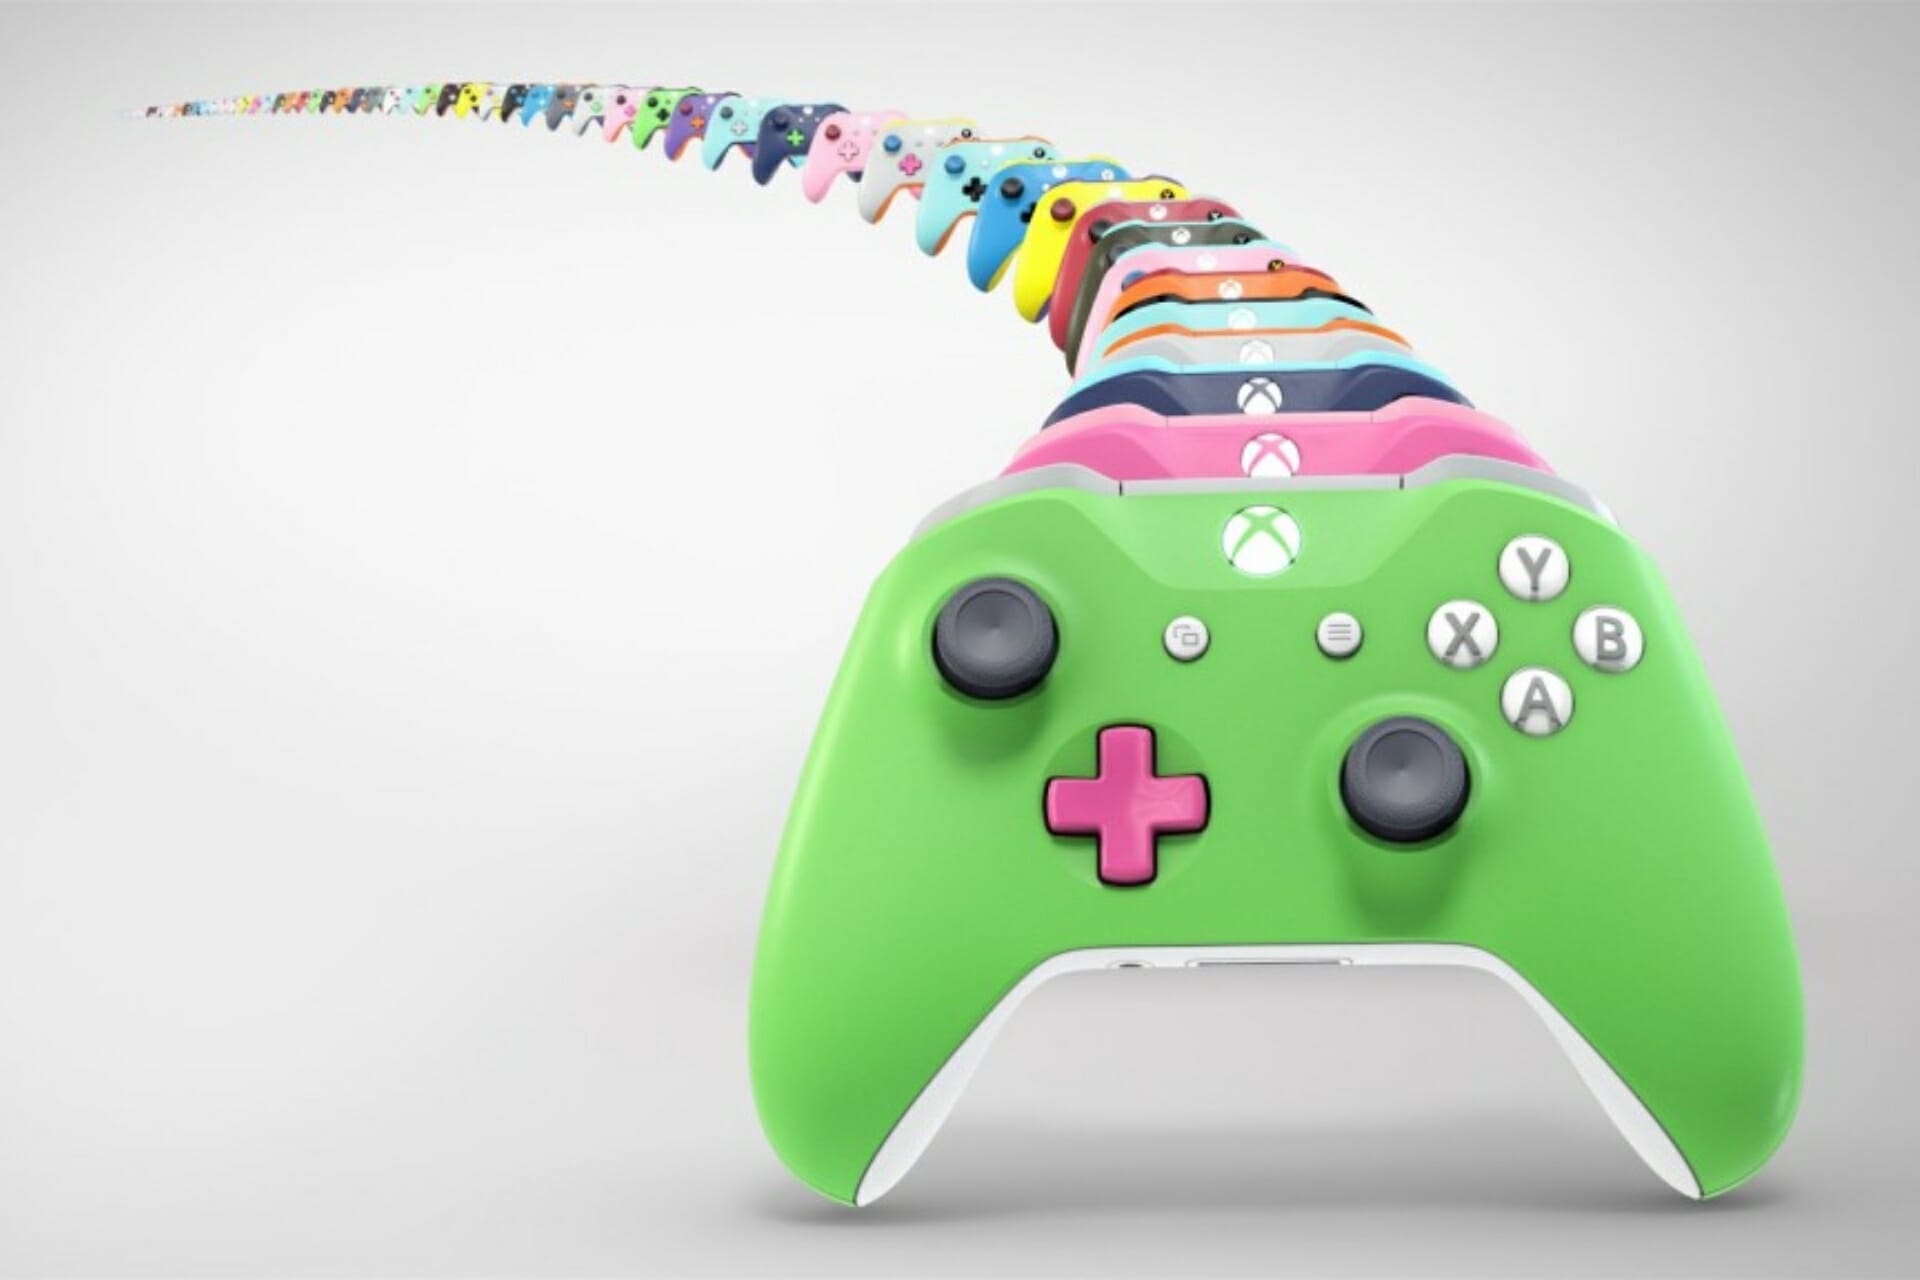 Xbox Design Lab is back for Series X|S controllers